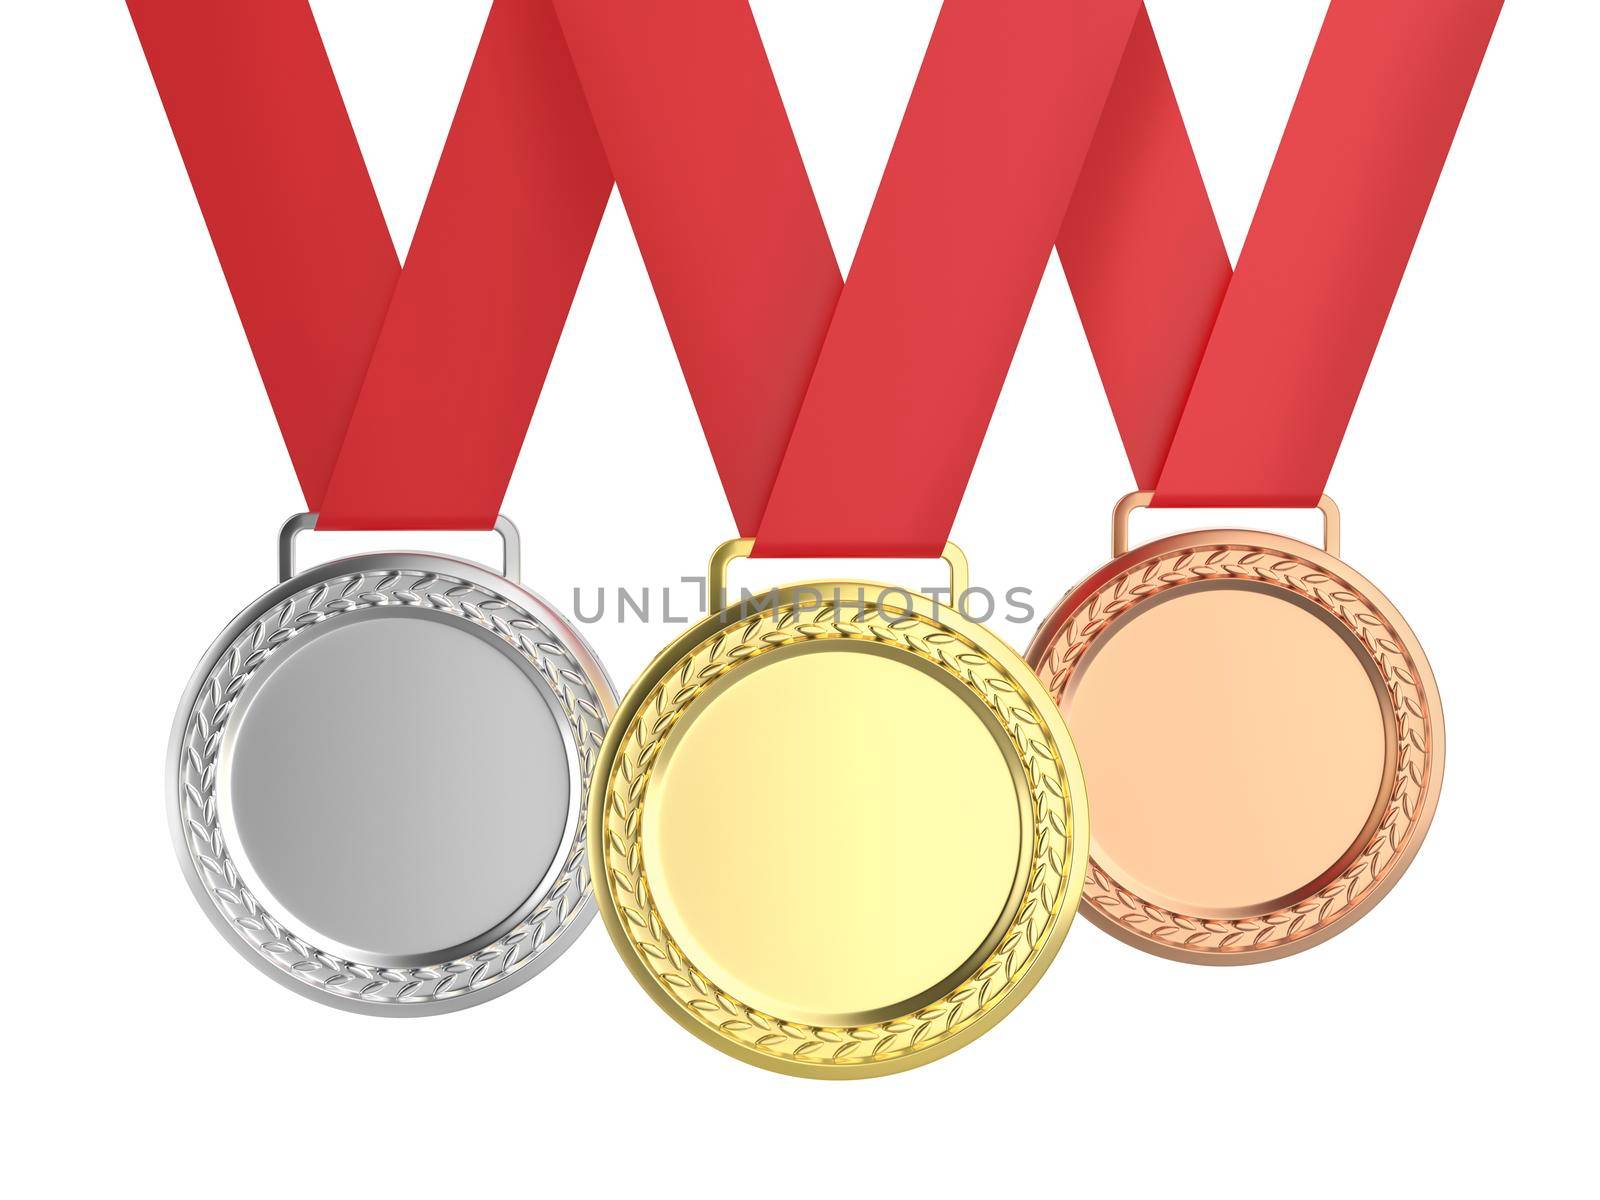 Gold, silver and bronze medals by magraphics